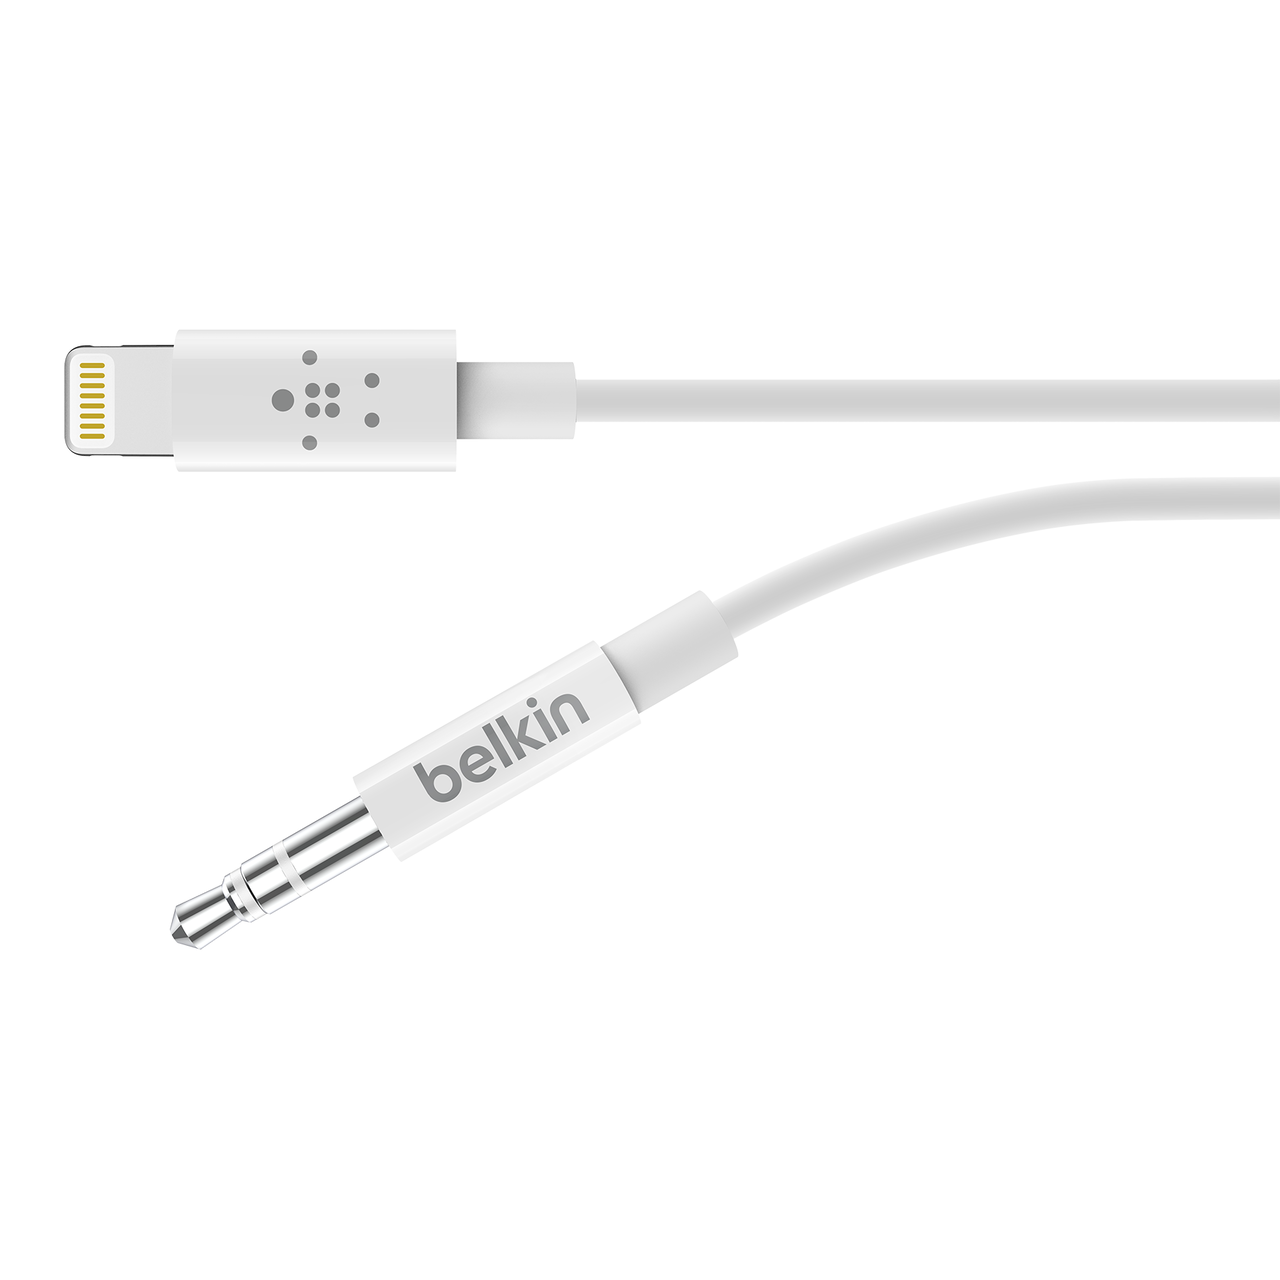 Belkin 3.5 mm Audio Cable With Lightning Connector in White